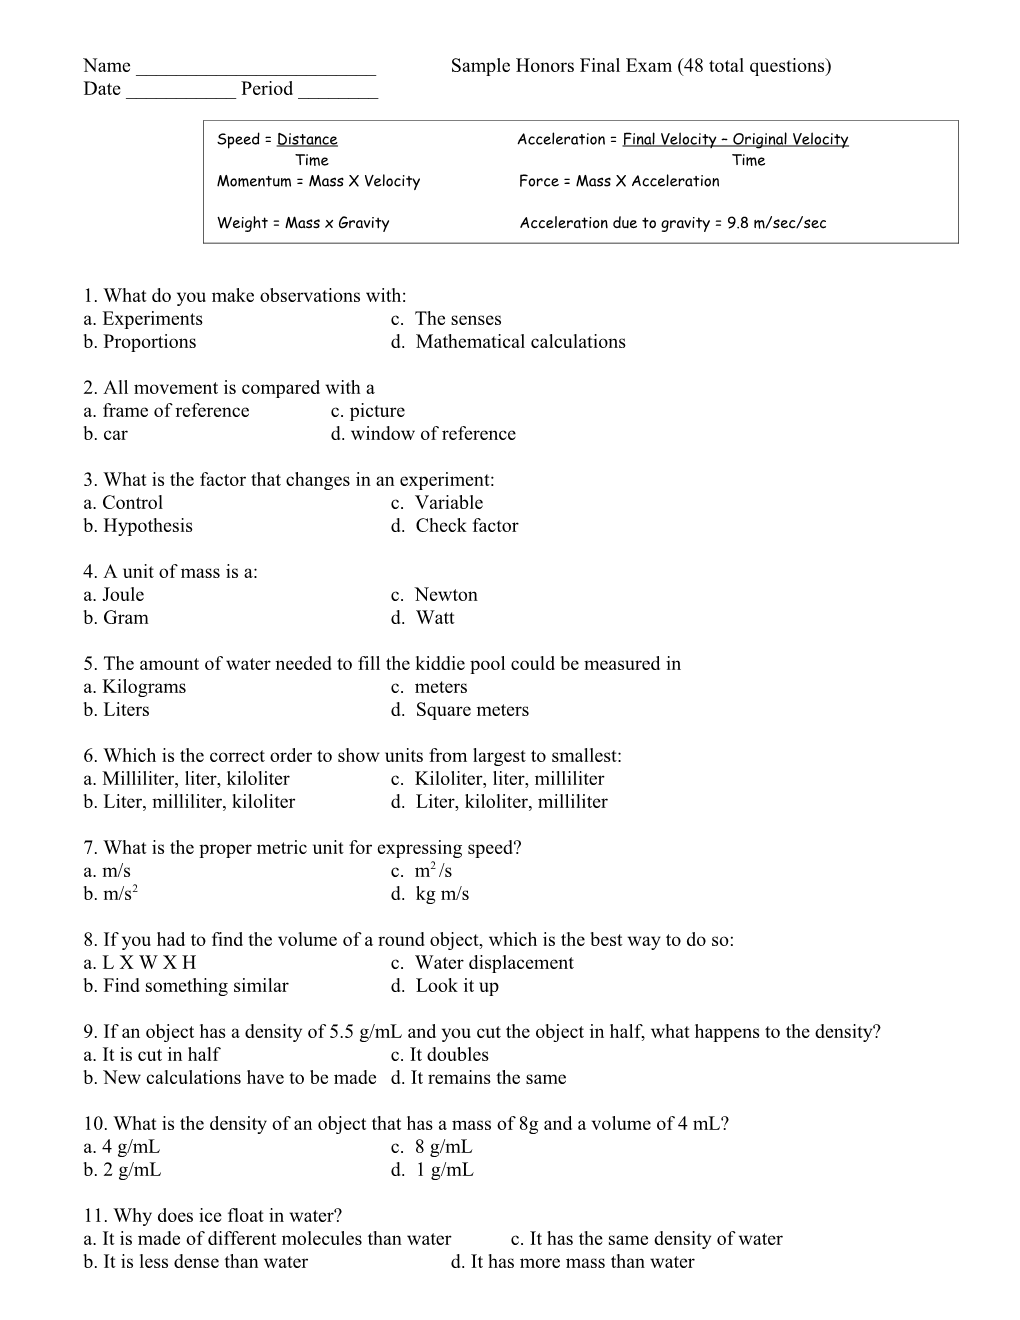 Name ______Sample Honors Final Exam (48 Total Questions)